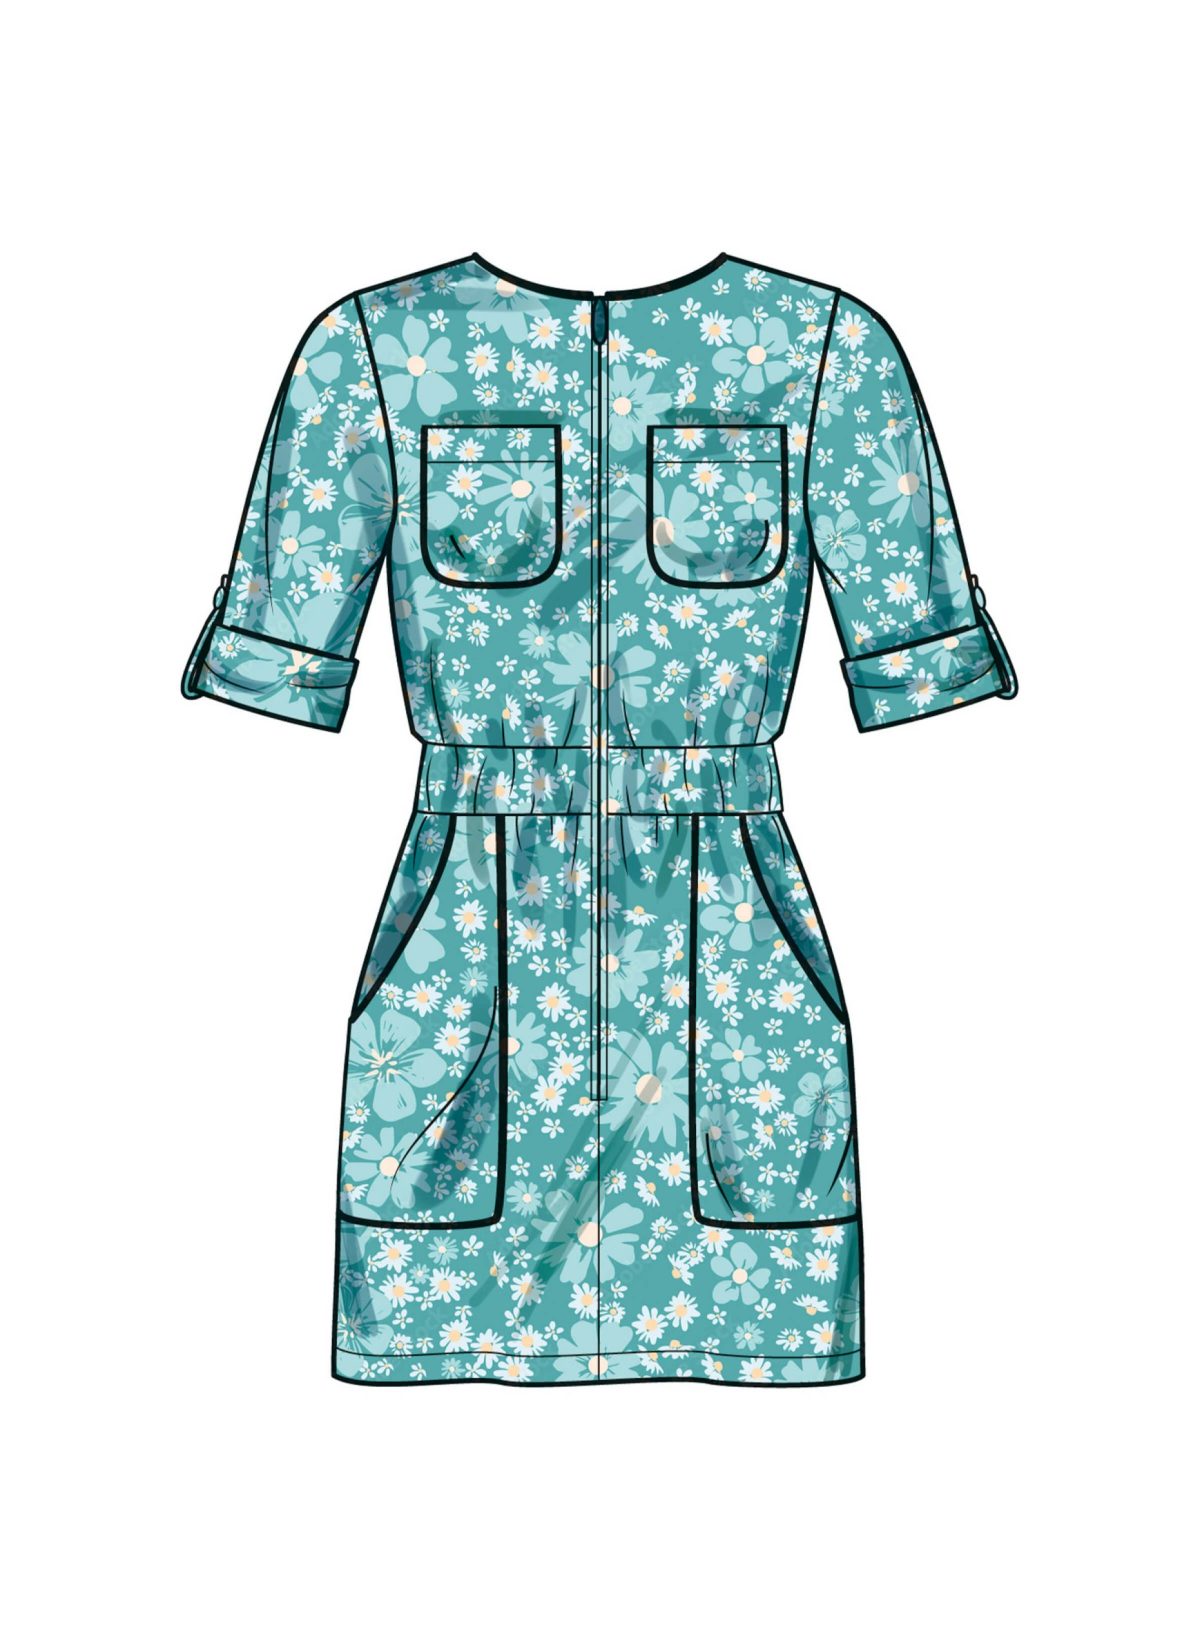 Simplicity Sewing Pattern S9722 Children's and Girls' Jumpsuit, Romper and Dress